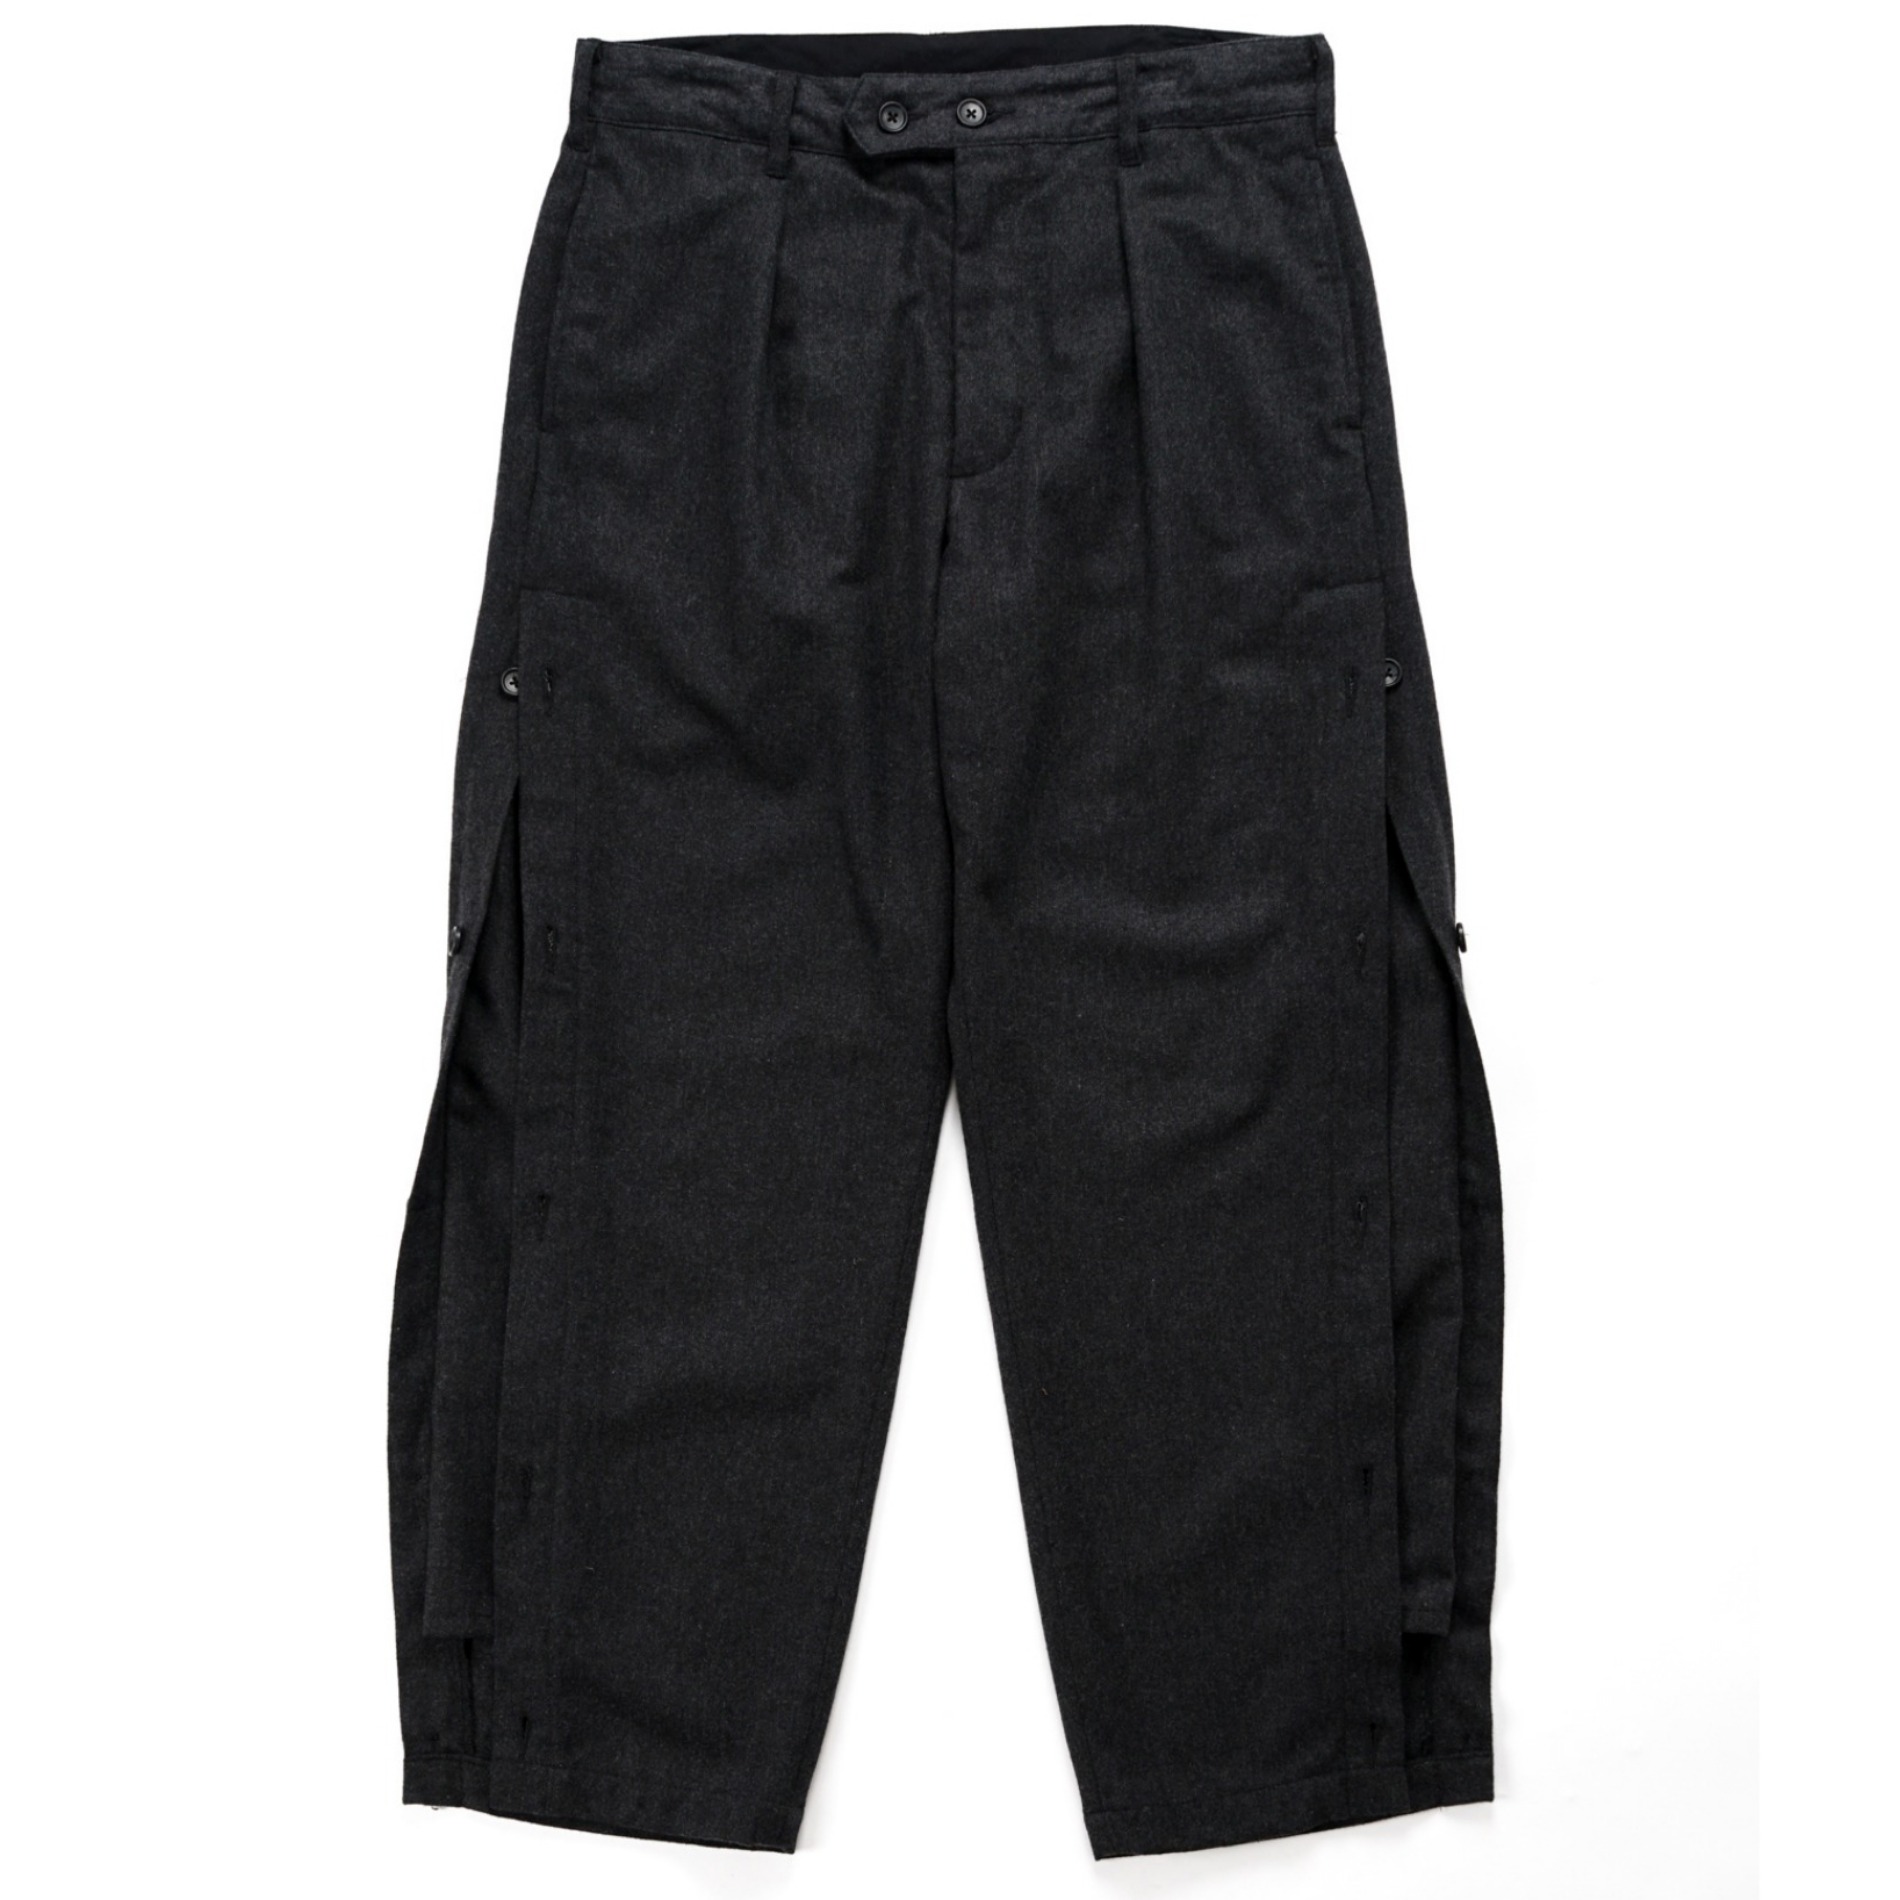 RANDT RT PANTS BLACK SOLID POLY WOOL FLANNEL